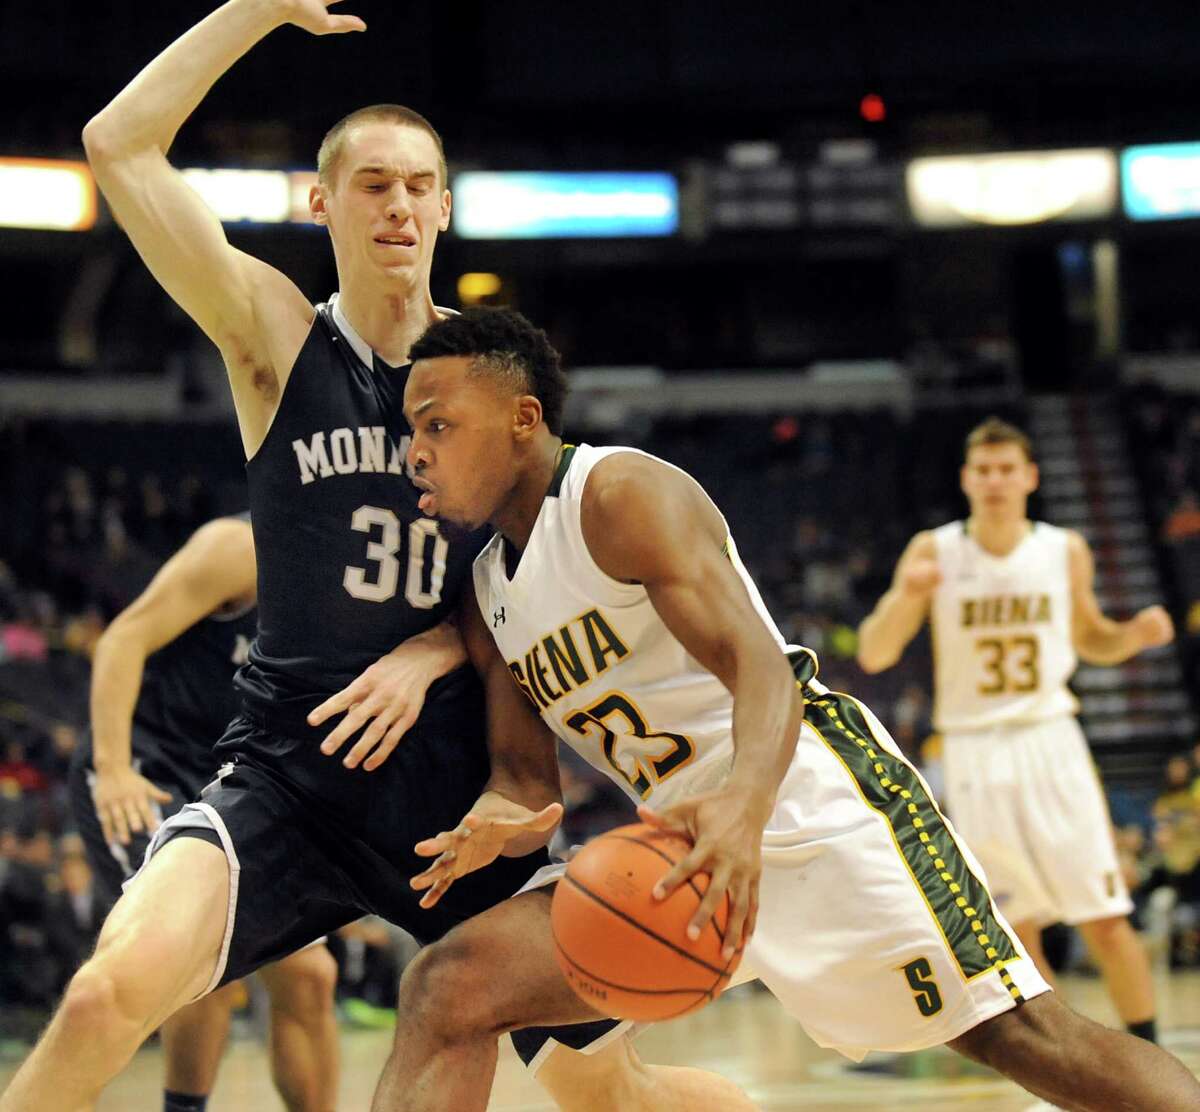 Siena's Maurice White, center, drives past Monmouth's Collin Stewart during their basketball game on Saturday, Feb. 14, 2015, at Times Union Center in Albany, N.Y. (Cindy Schultz / Times Union)